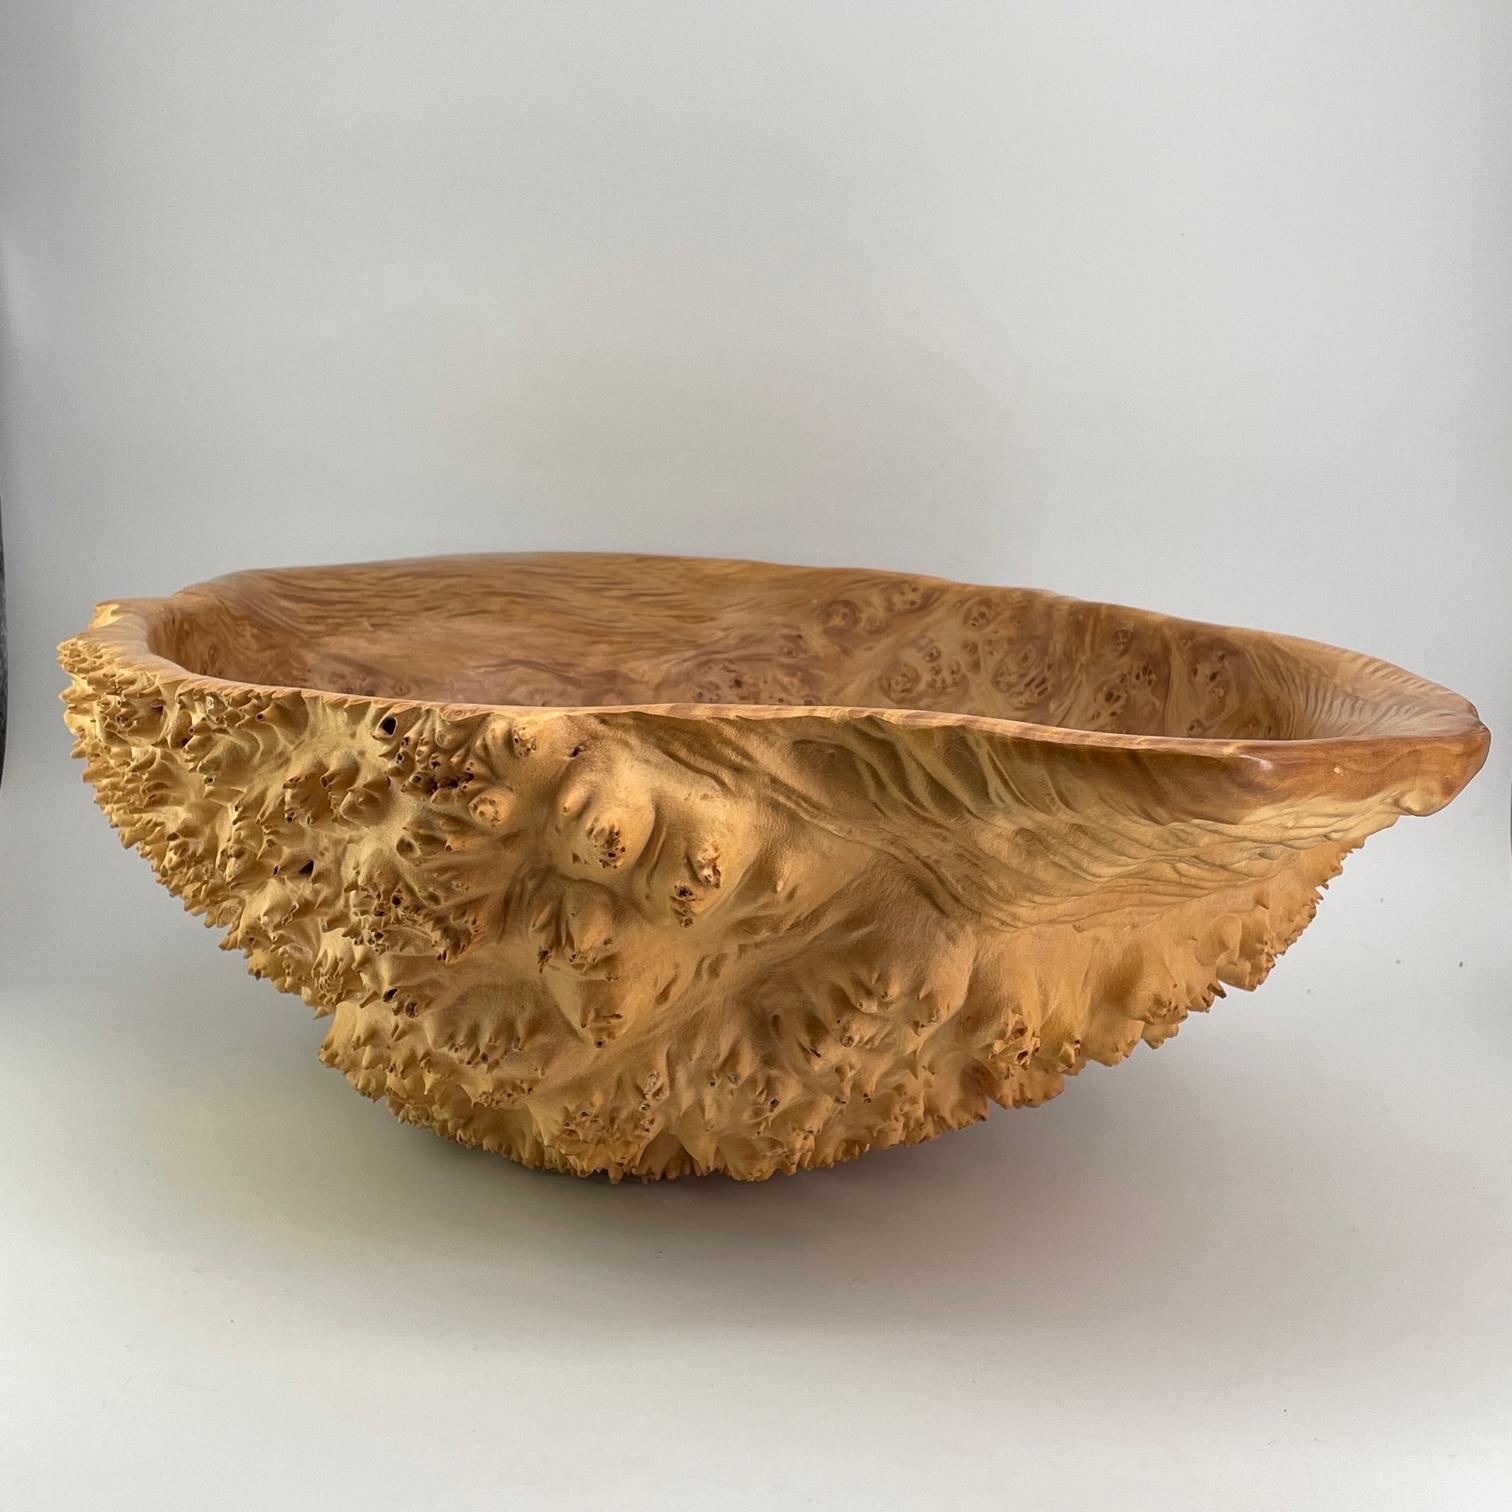 USA, c. 1995. Bob Womack Large Maple Burl Bowl
W 17 ½  × D 14 ⅛  × H 6 in.

